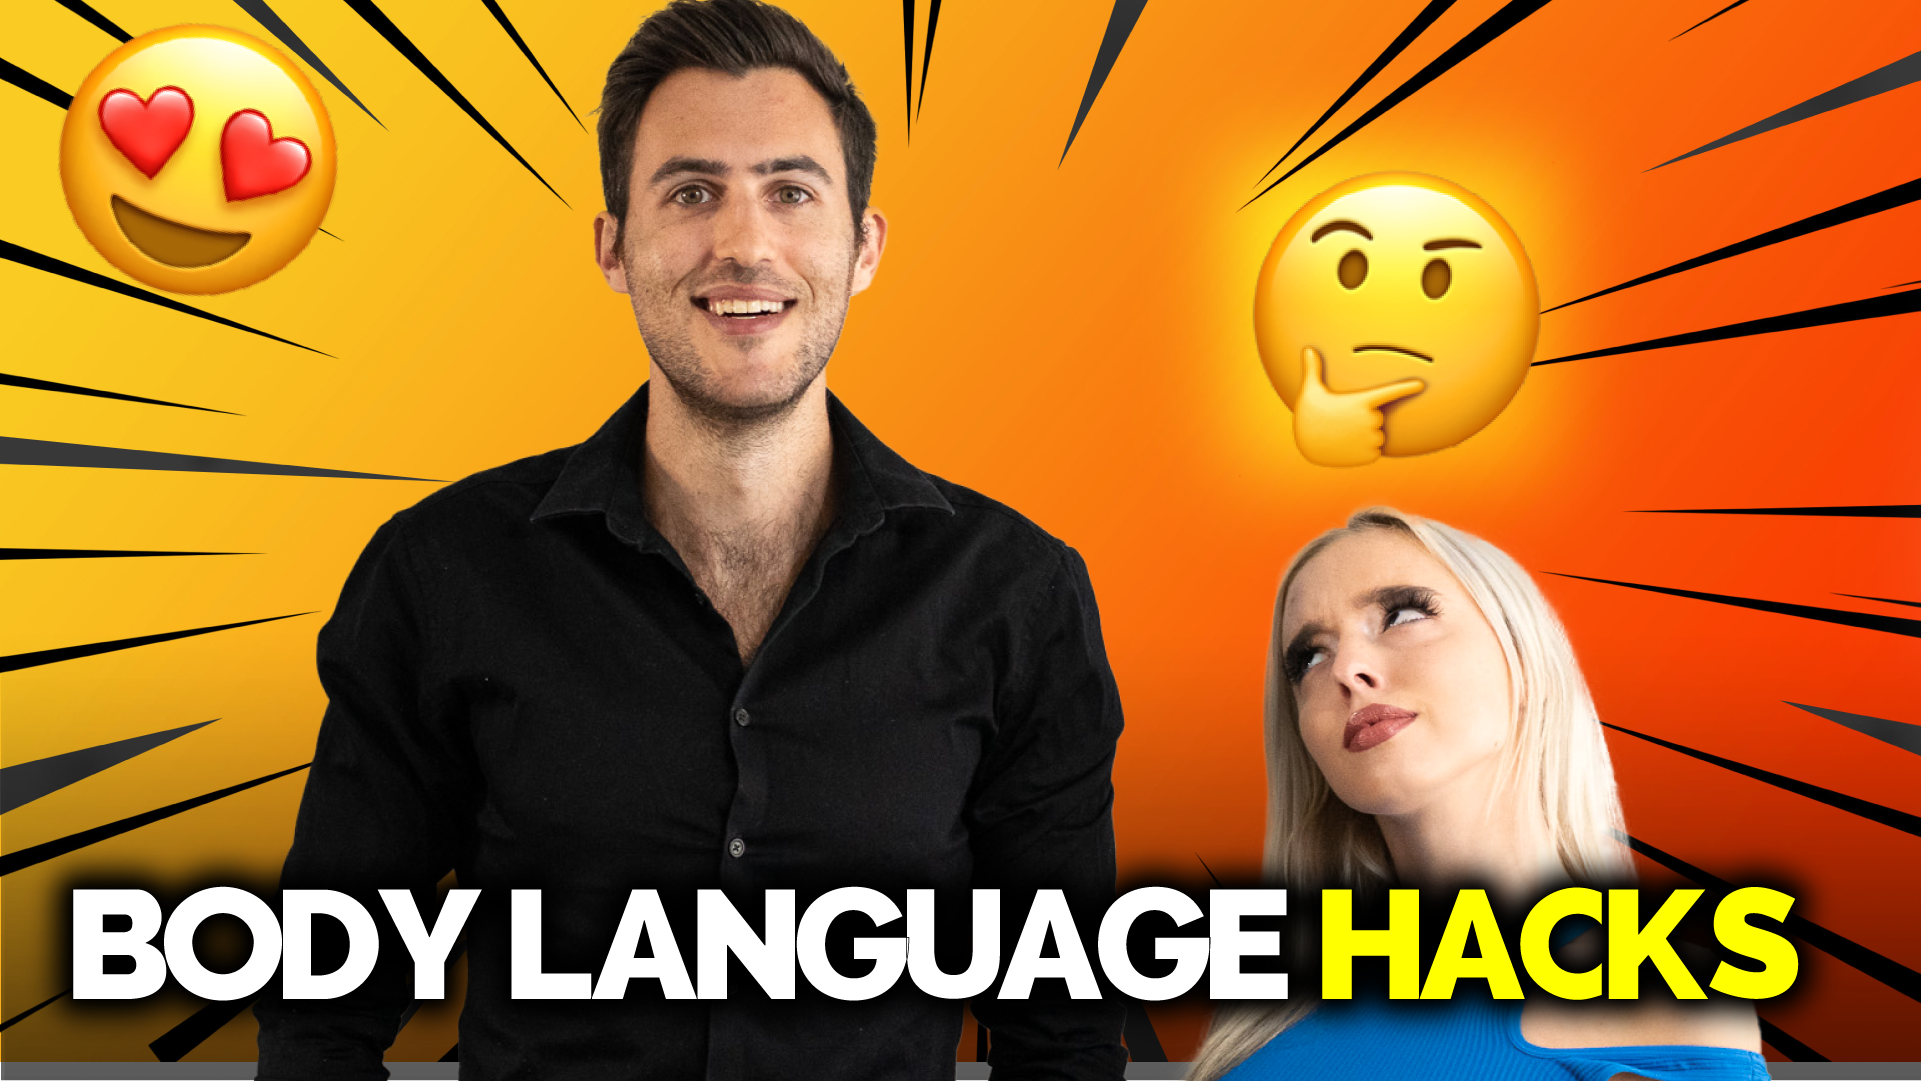 3 Body Language Hacks That Make Hot Women More Attracted To You